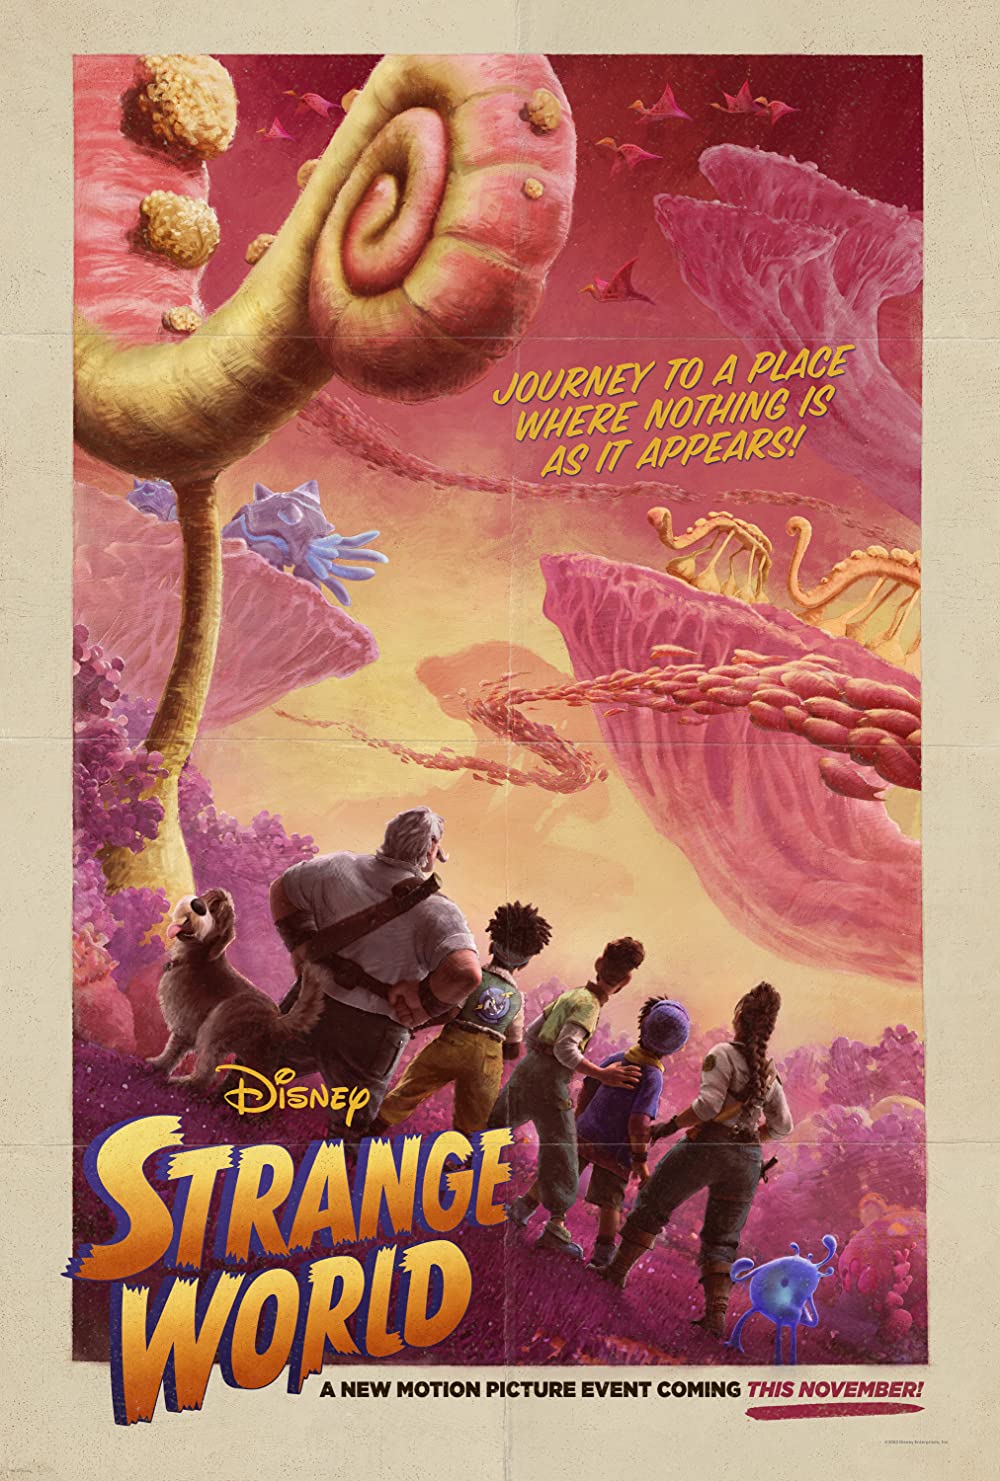 Strange World Movie (2022) Cast & Crew, Release Date, Story, Review, Poster, Trailer, Budget, Collection
